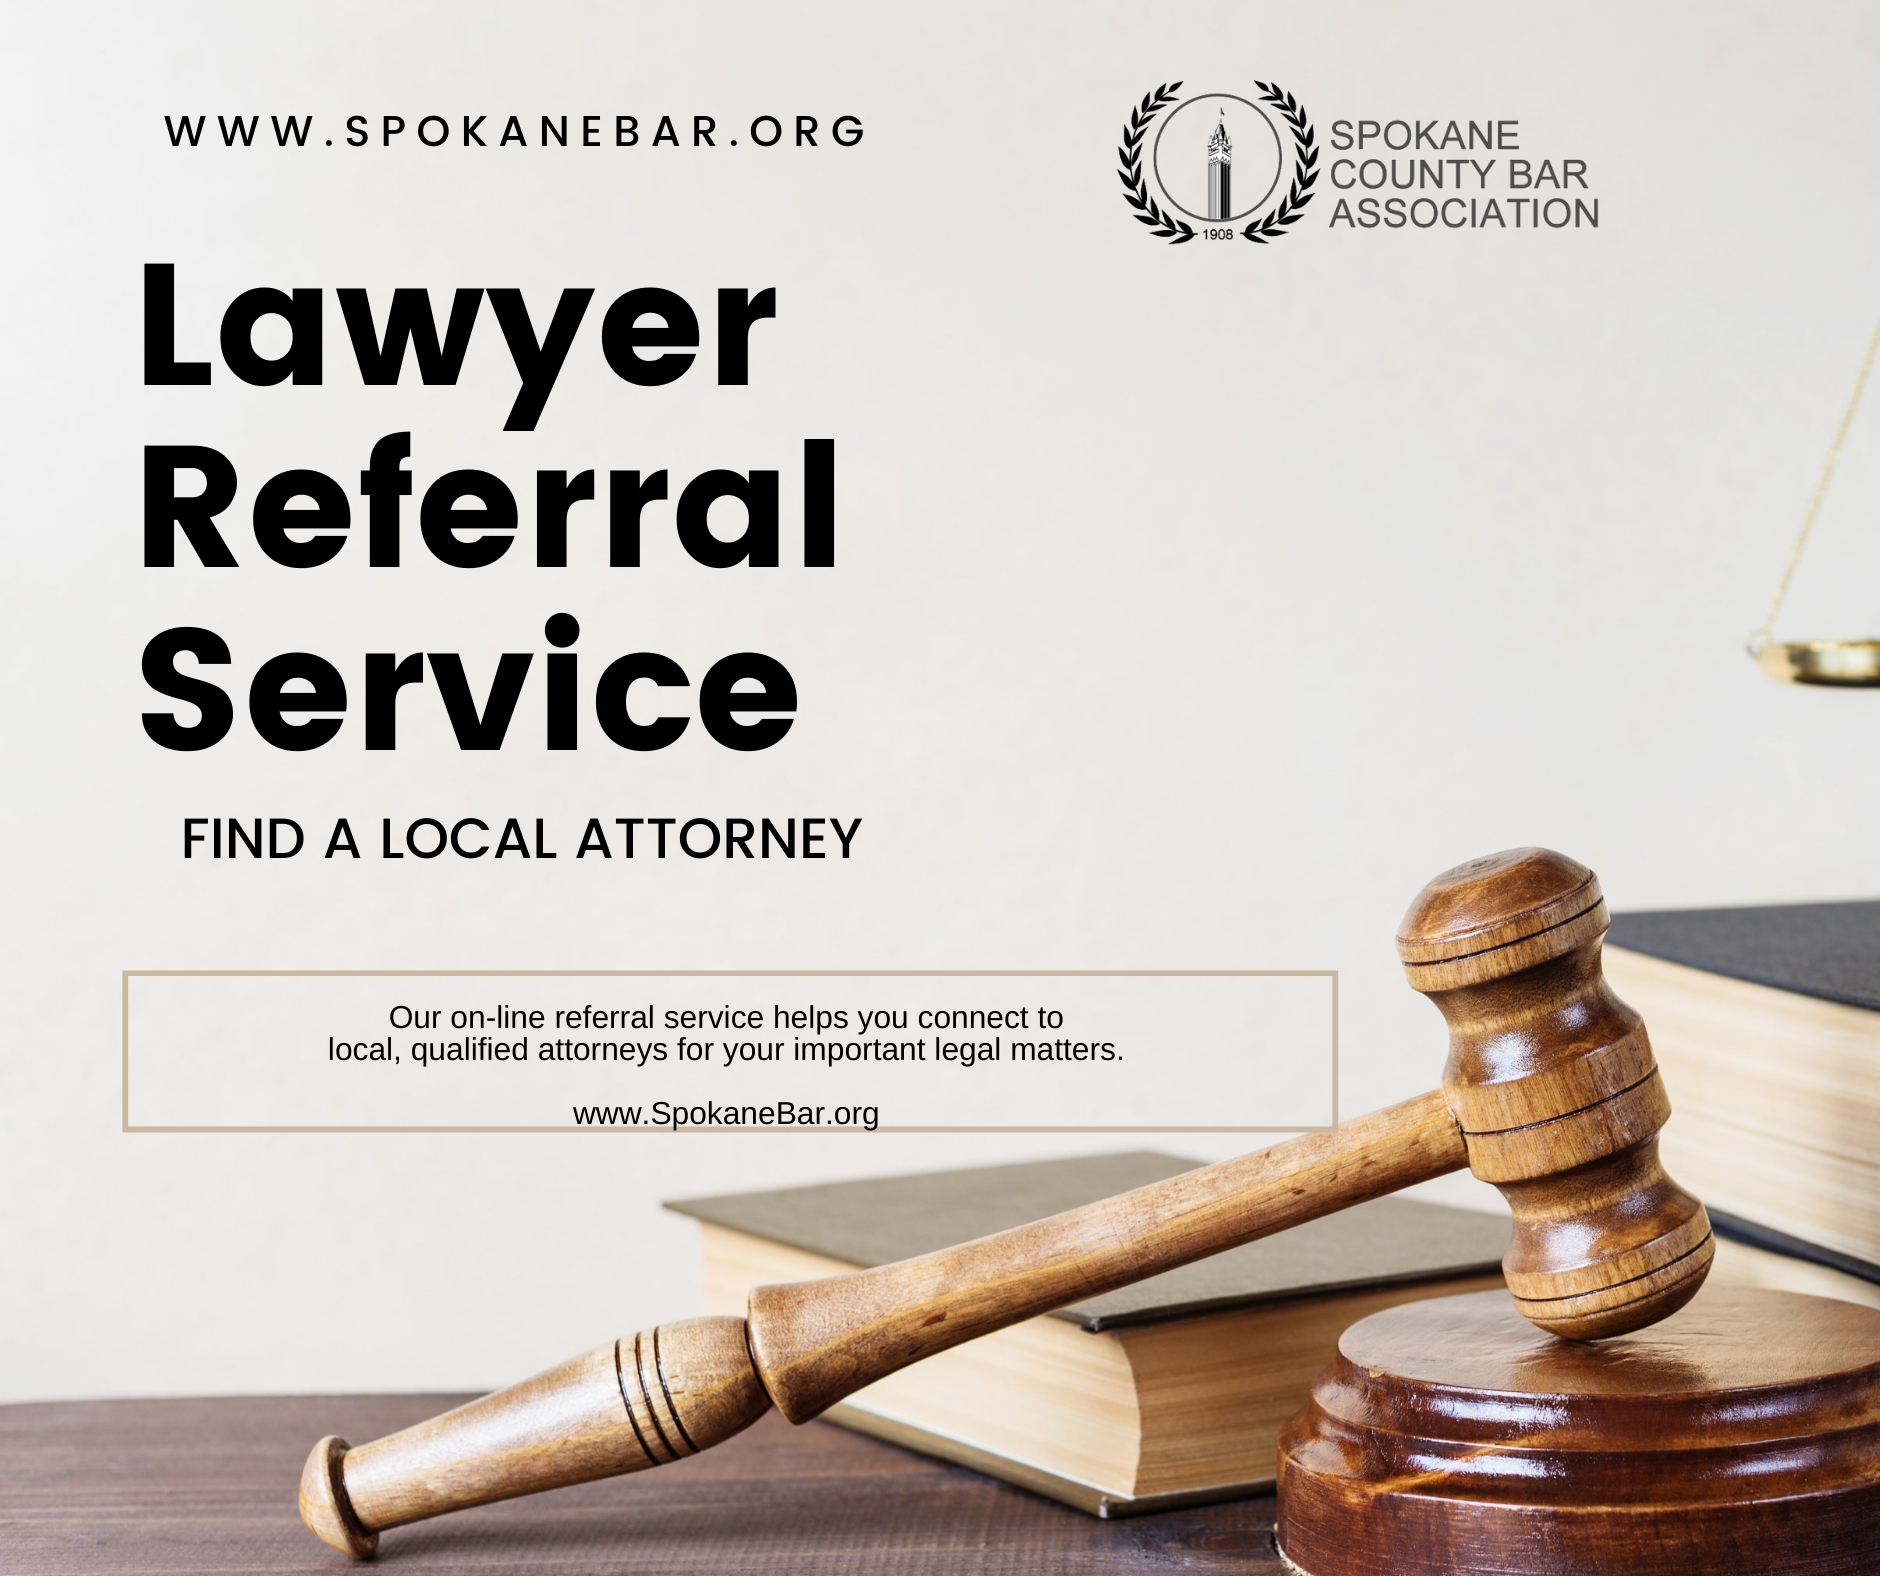 Need to hire an attorney - check out the SCBA Lawyer Referral Service